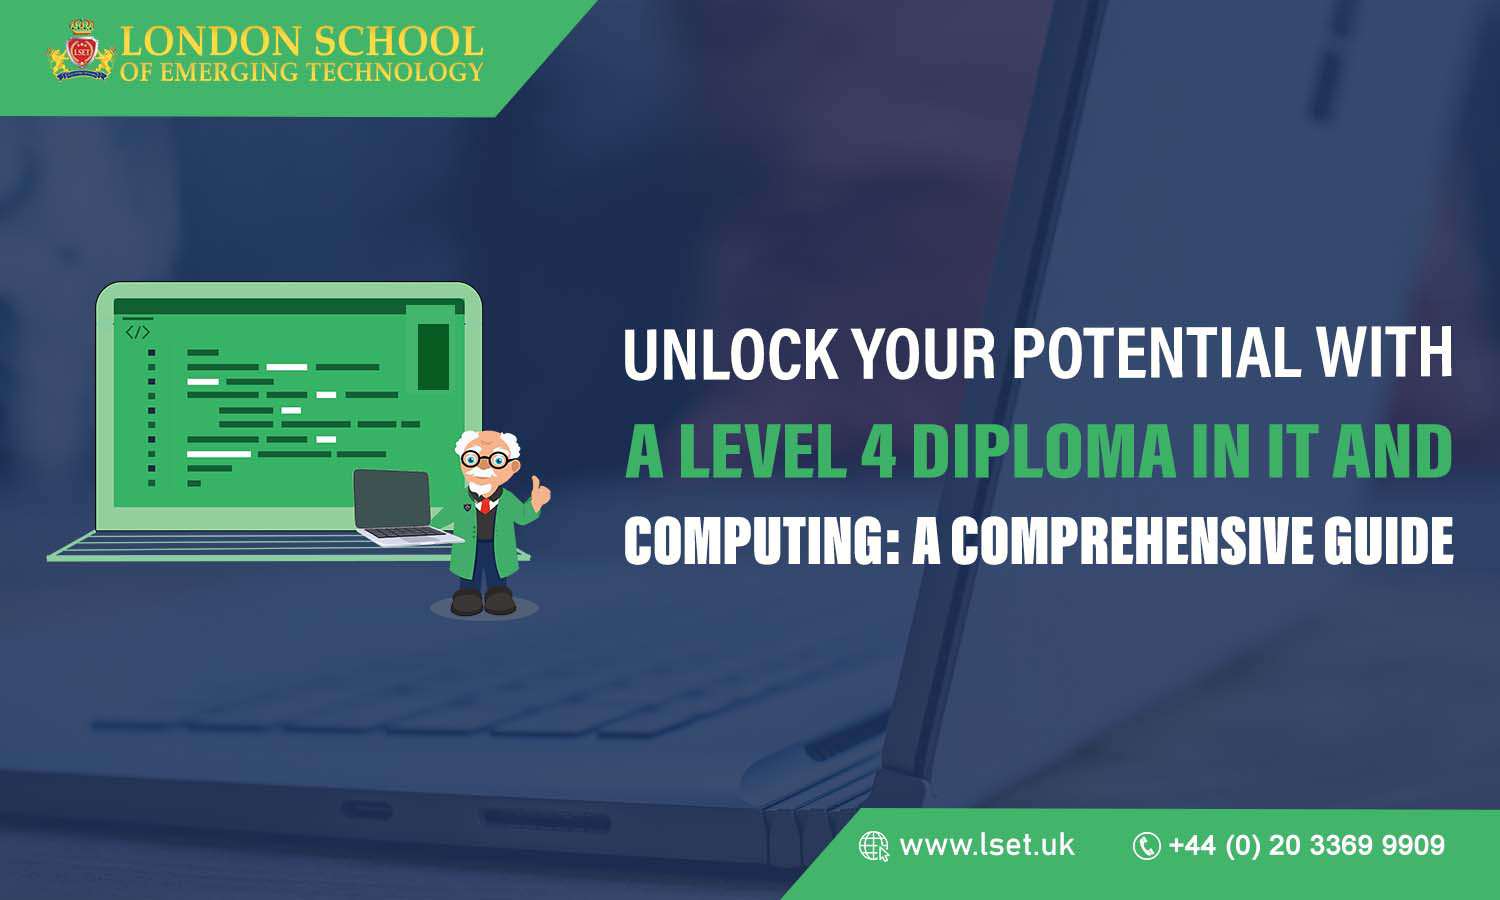 Unlock Your Potential with a Level 4 Diploma in IT and Computing A Comprehensive Guide 4.48.22 PM